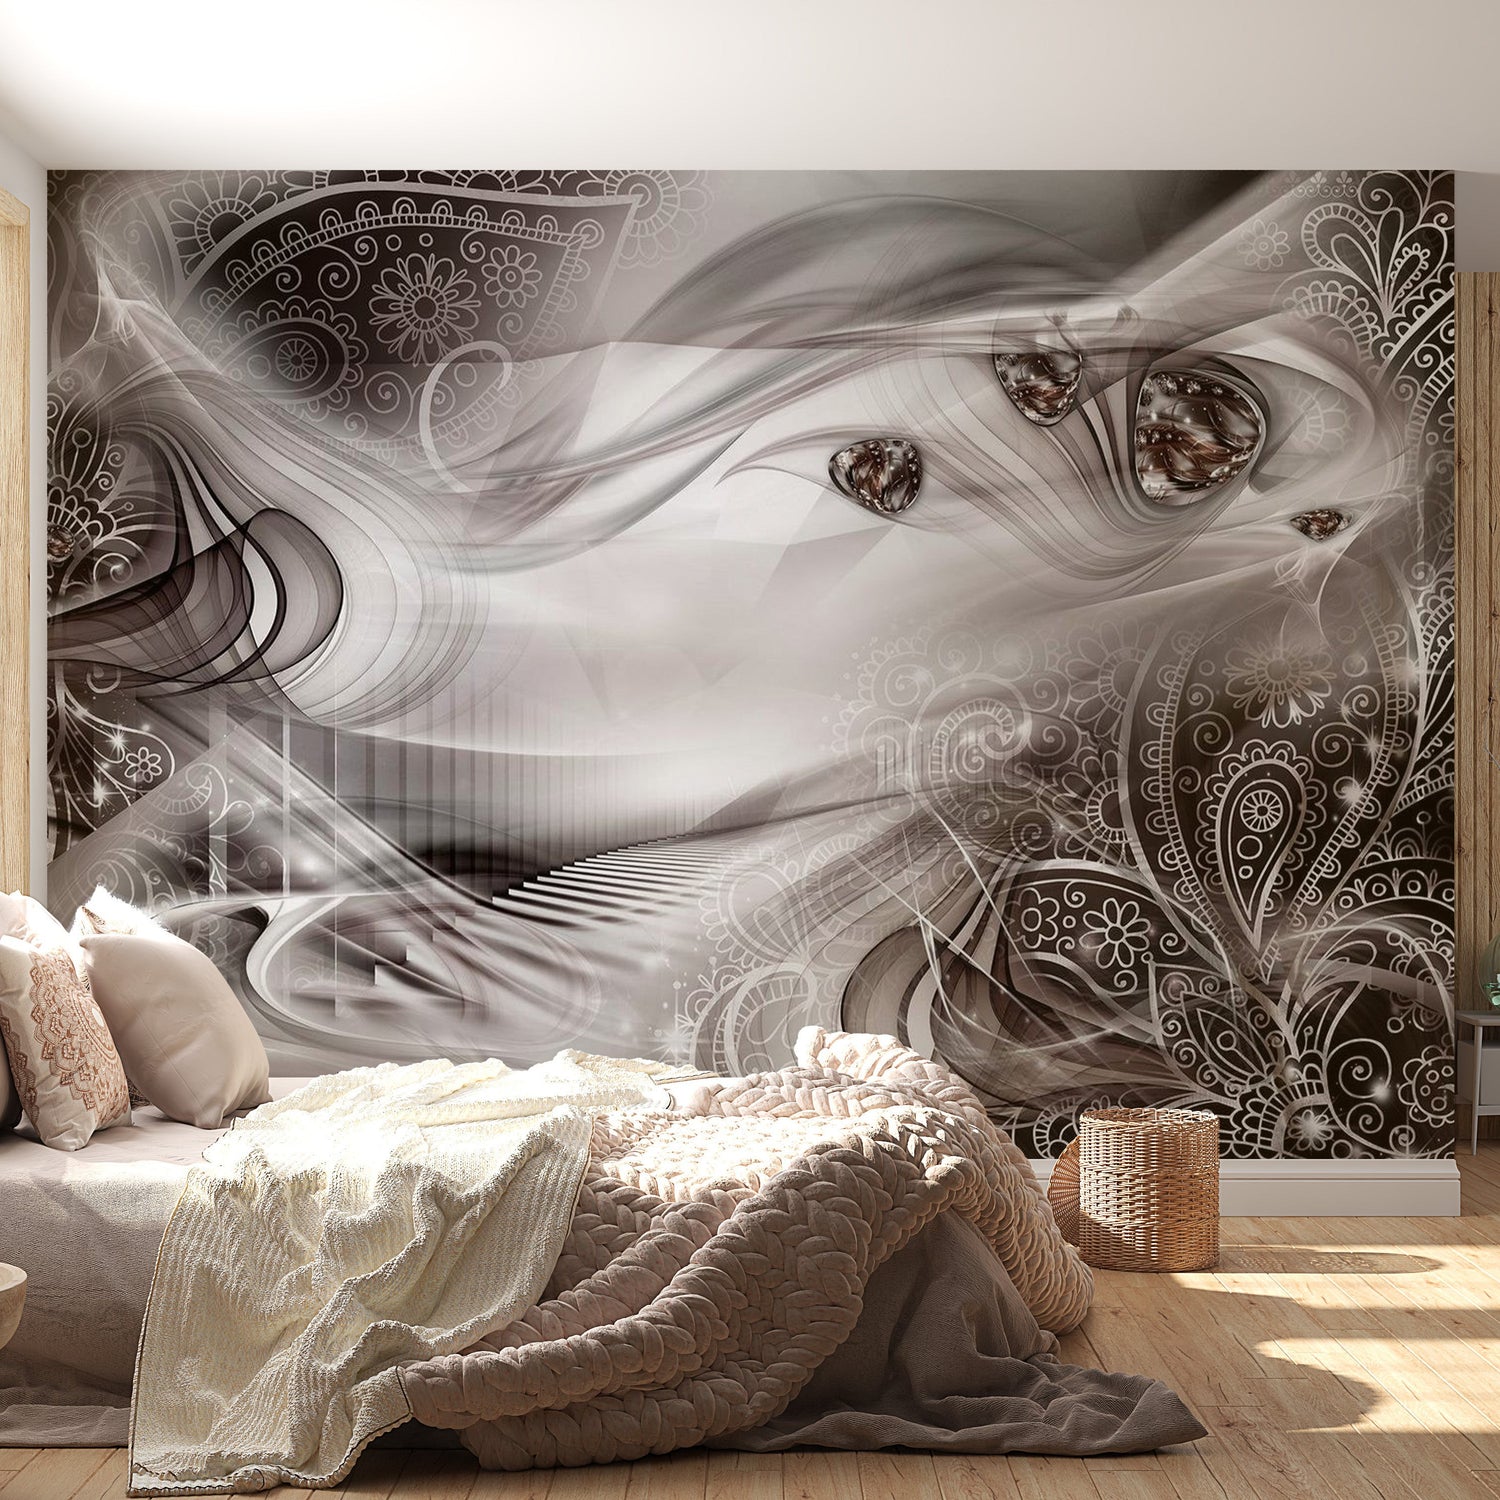 Peel & Stick Glam Wall Mural - Autumn Evenings Grey - Removable Wall Decals